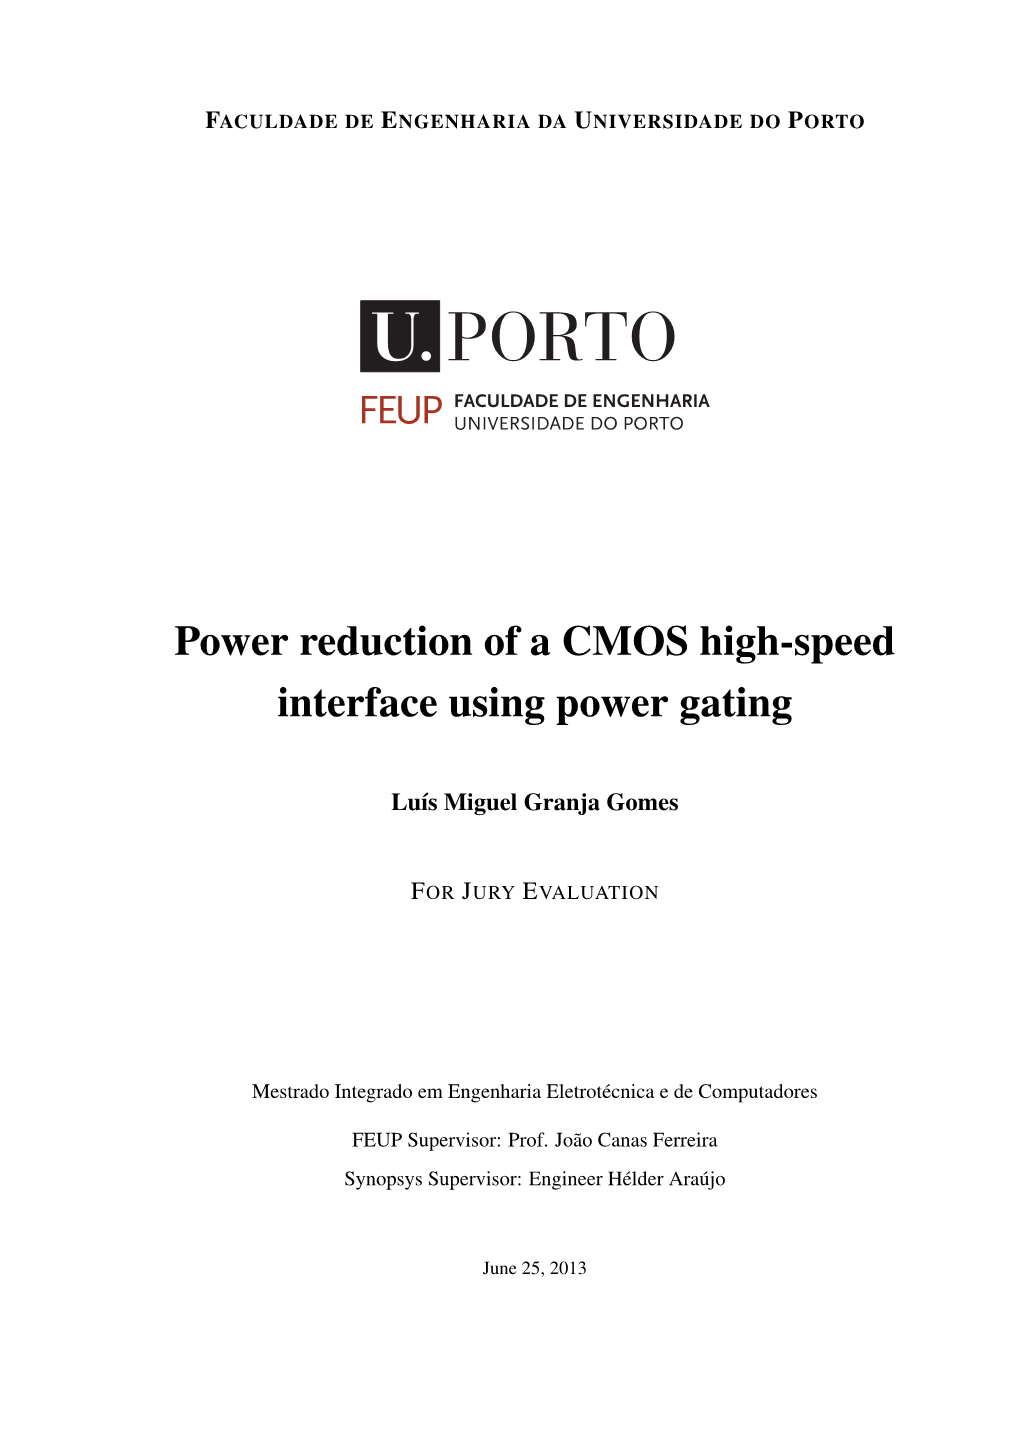 Power Reduction of a CMOS High-Speed Interface Using Power Gating